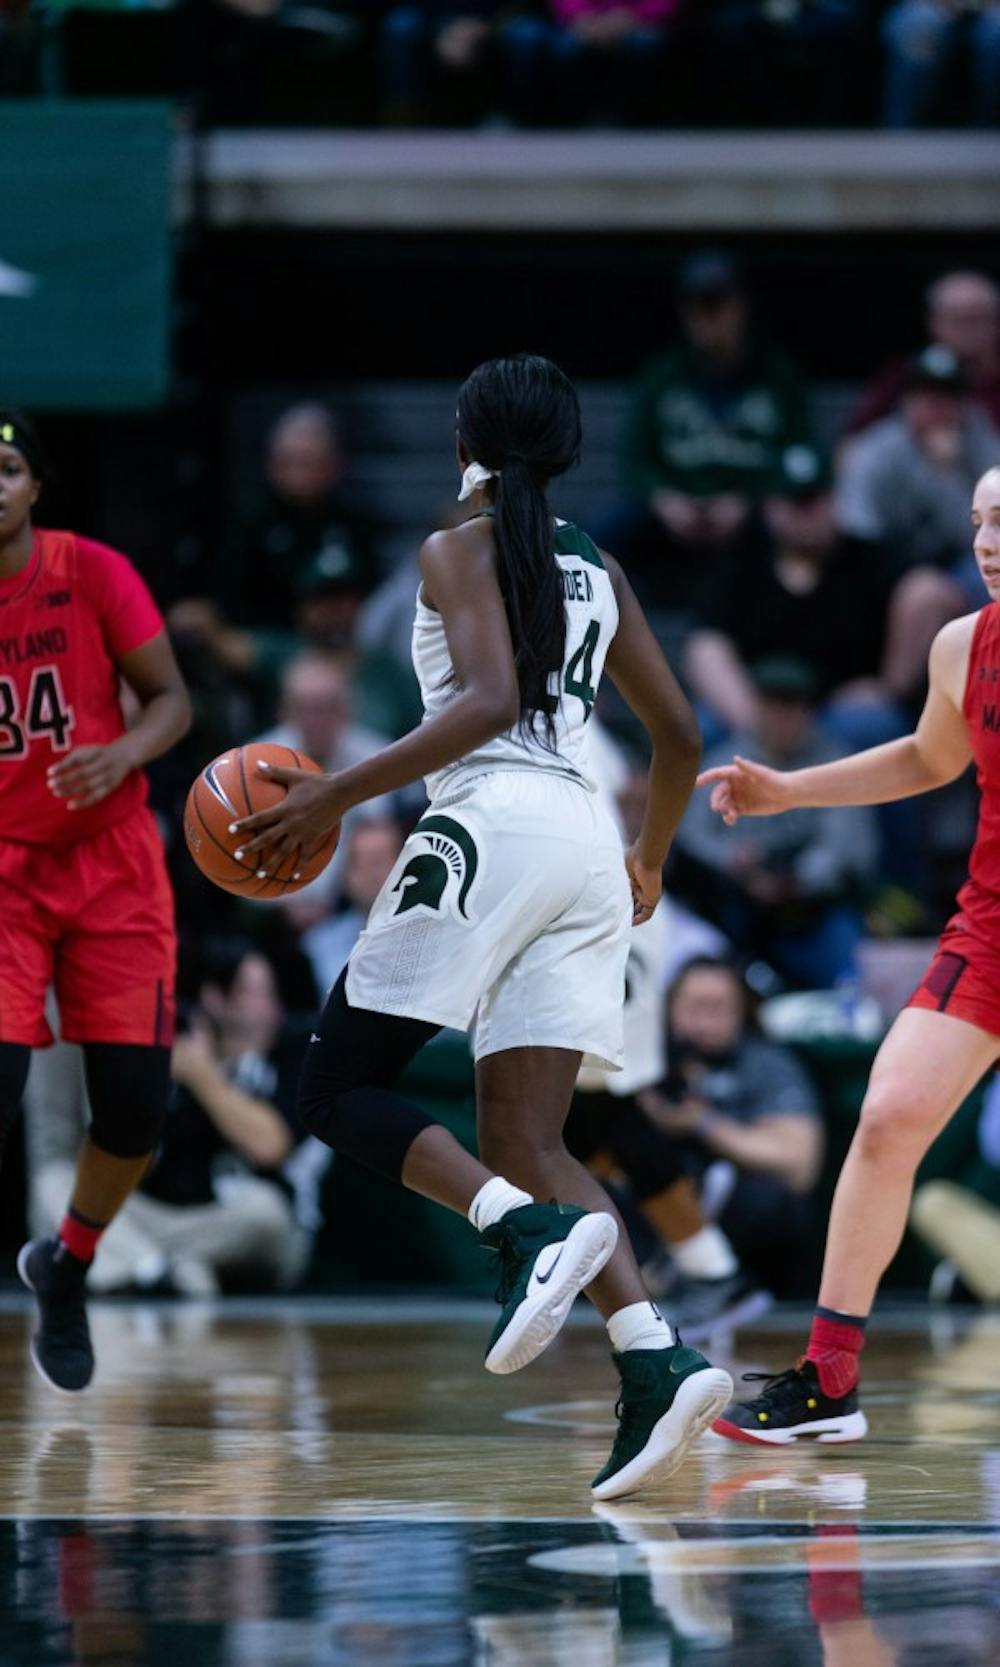 <p>Freshman guard Nia Clouden carries the ball up court during the game against Maryland at the Breslin Center on Jan. 17, 2019. The Spartans defeated the Terrapins, 77-60.</p>